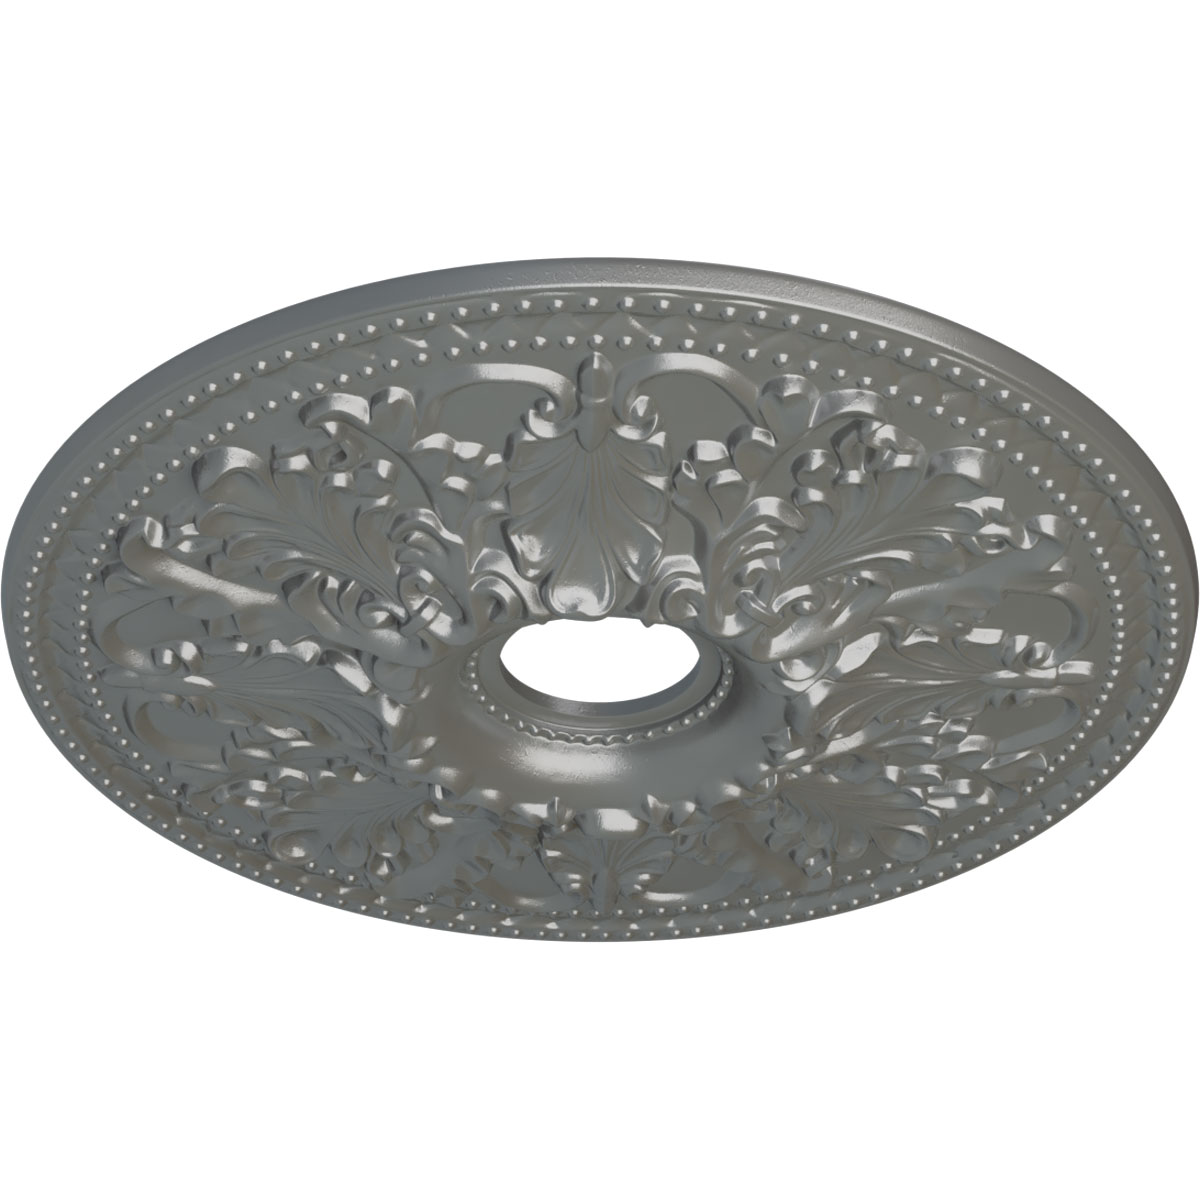 Ekena Millwork 23 7/8"OD x 4"ID x 2 1/8"P Ashley Ceiling Medallion (Fits Canopies up to 4 3/4"), Hand-Painted Silver - image 2 of 4